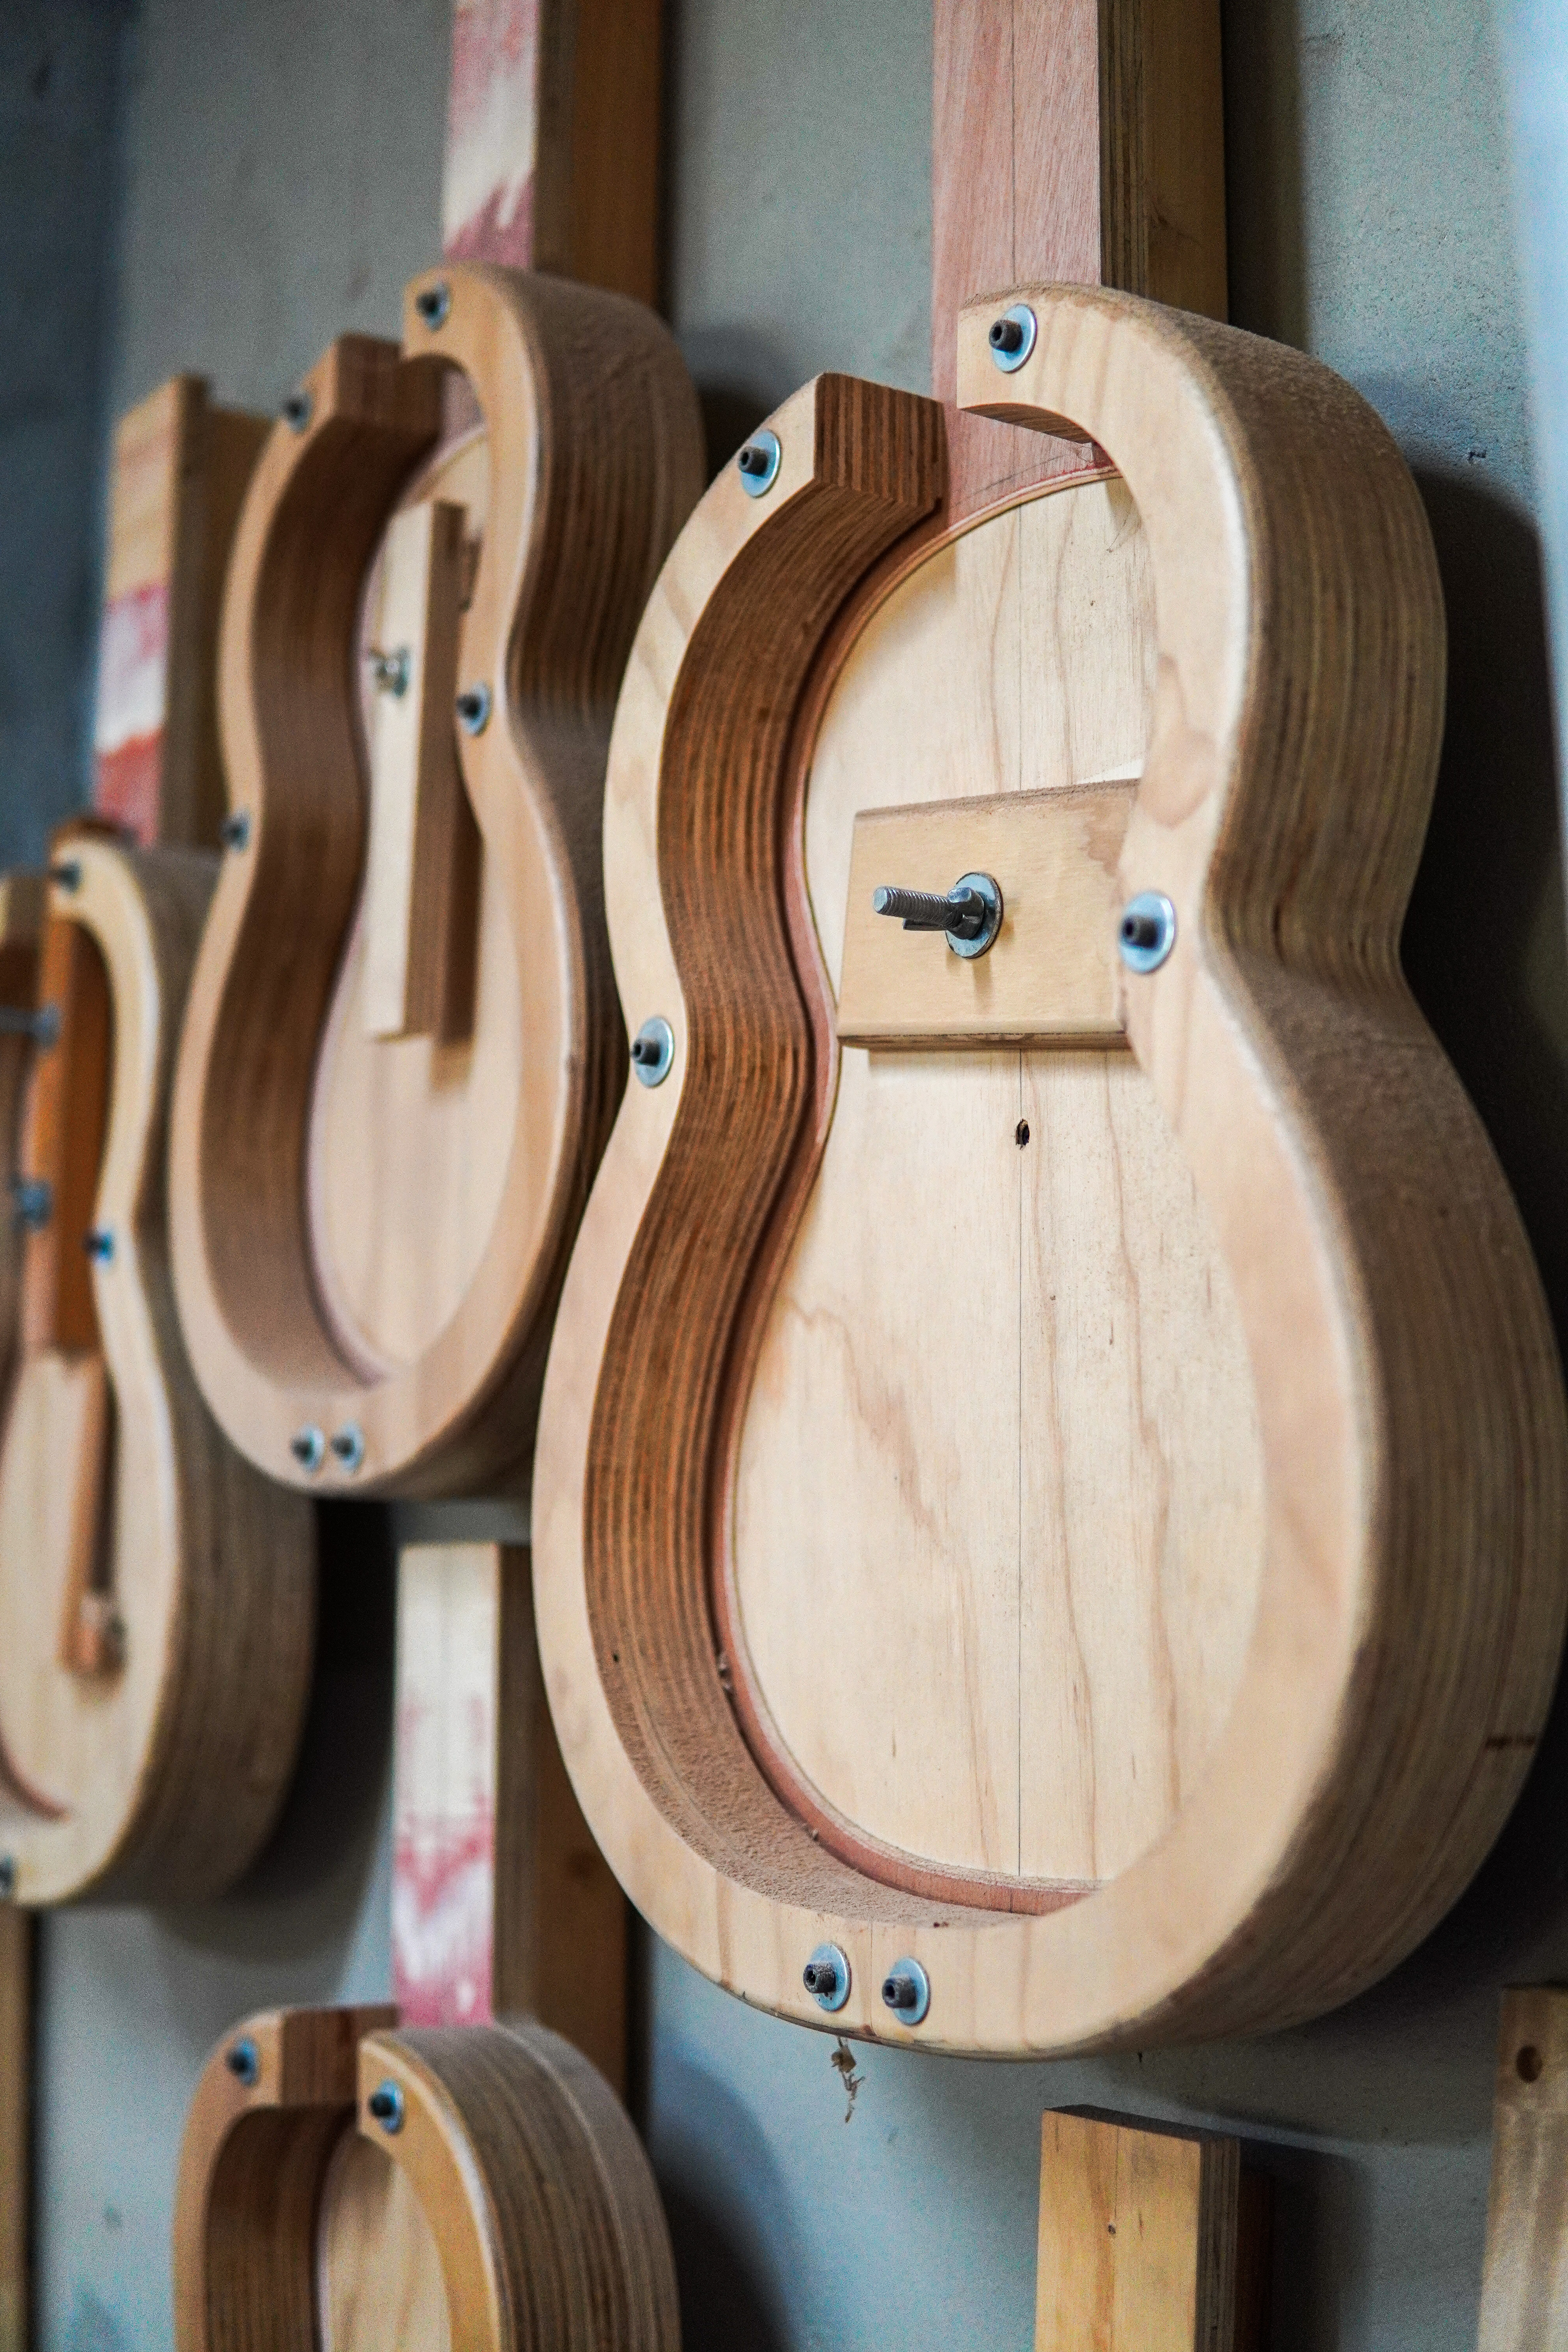 Guitars made in Medellin make perfect gifts from Colombia.